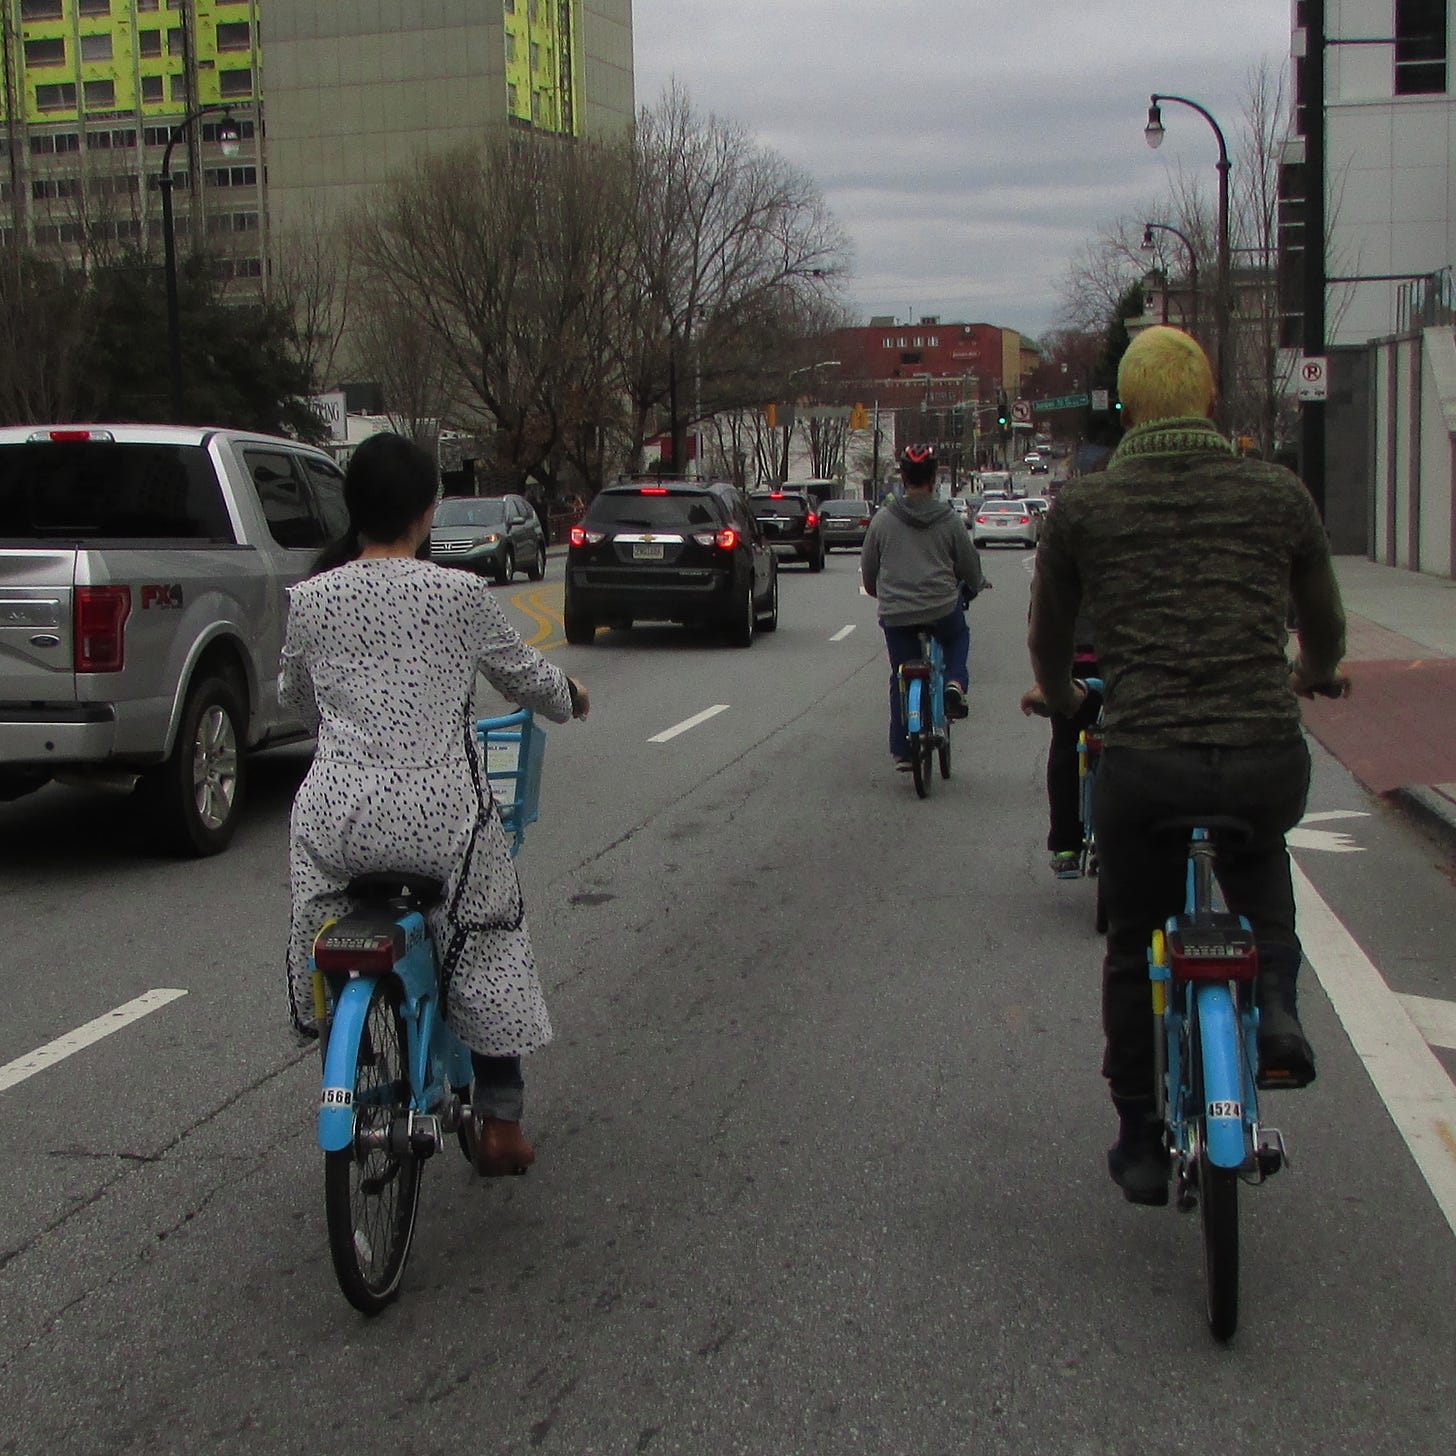 Photo showing two people riding bikes side by side